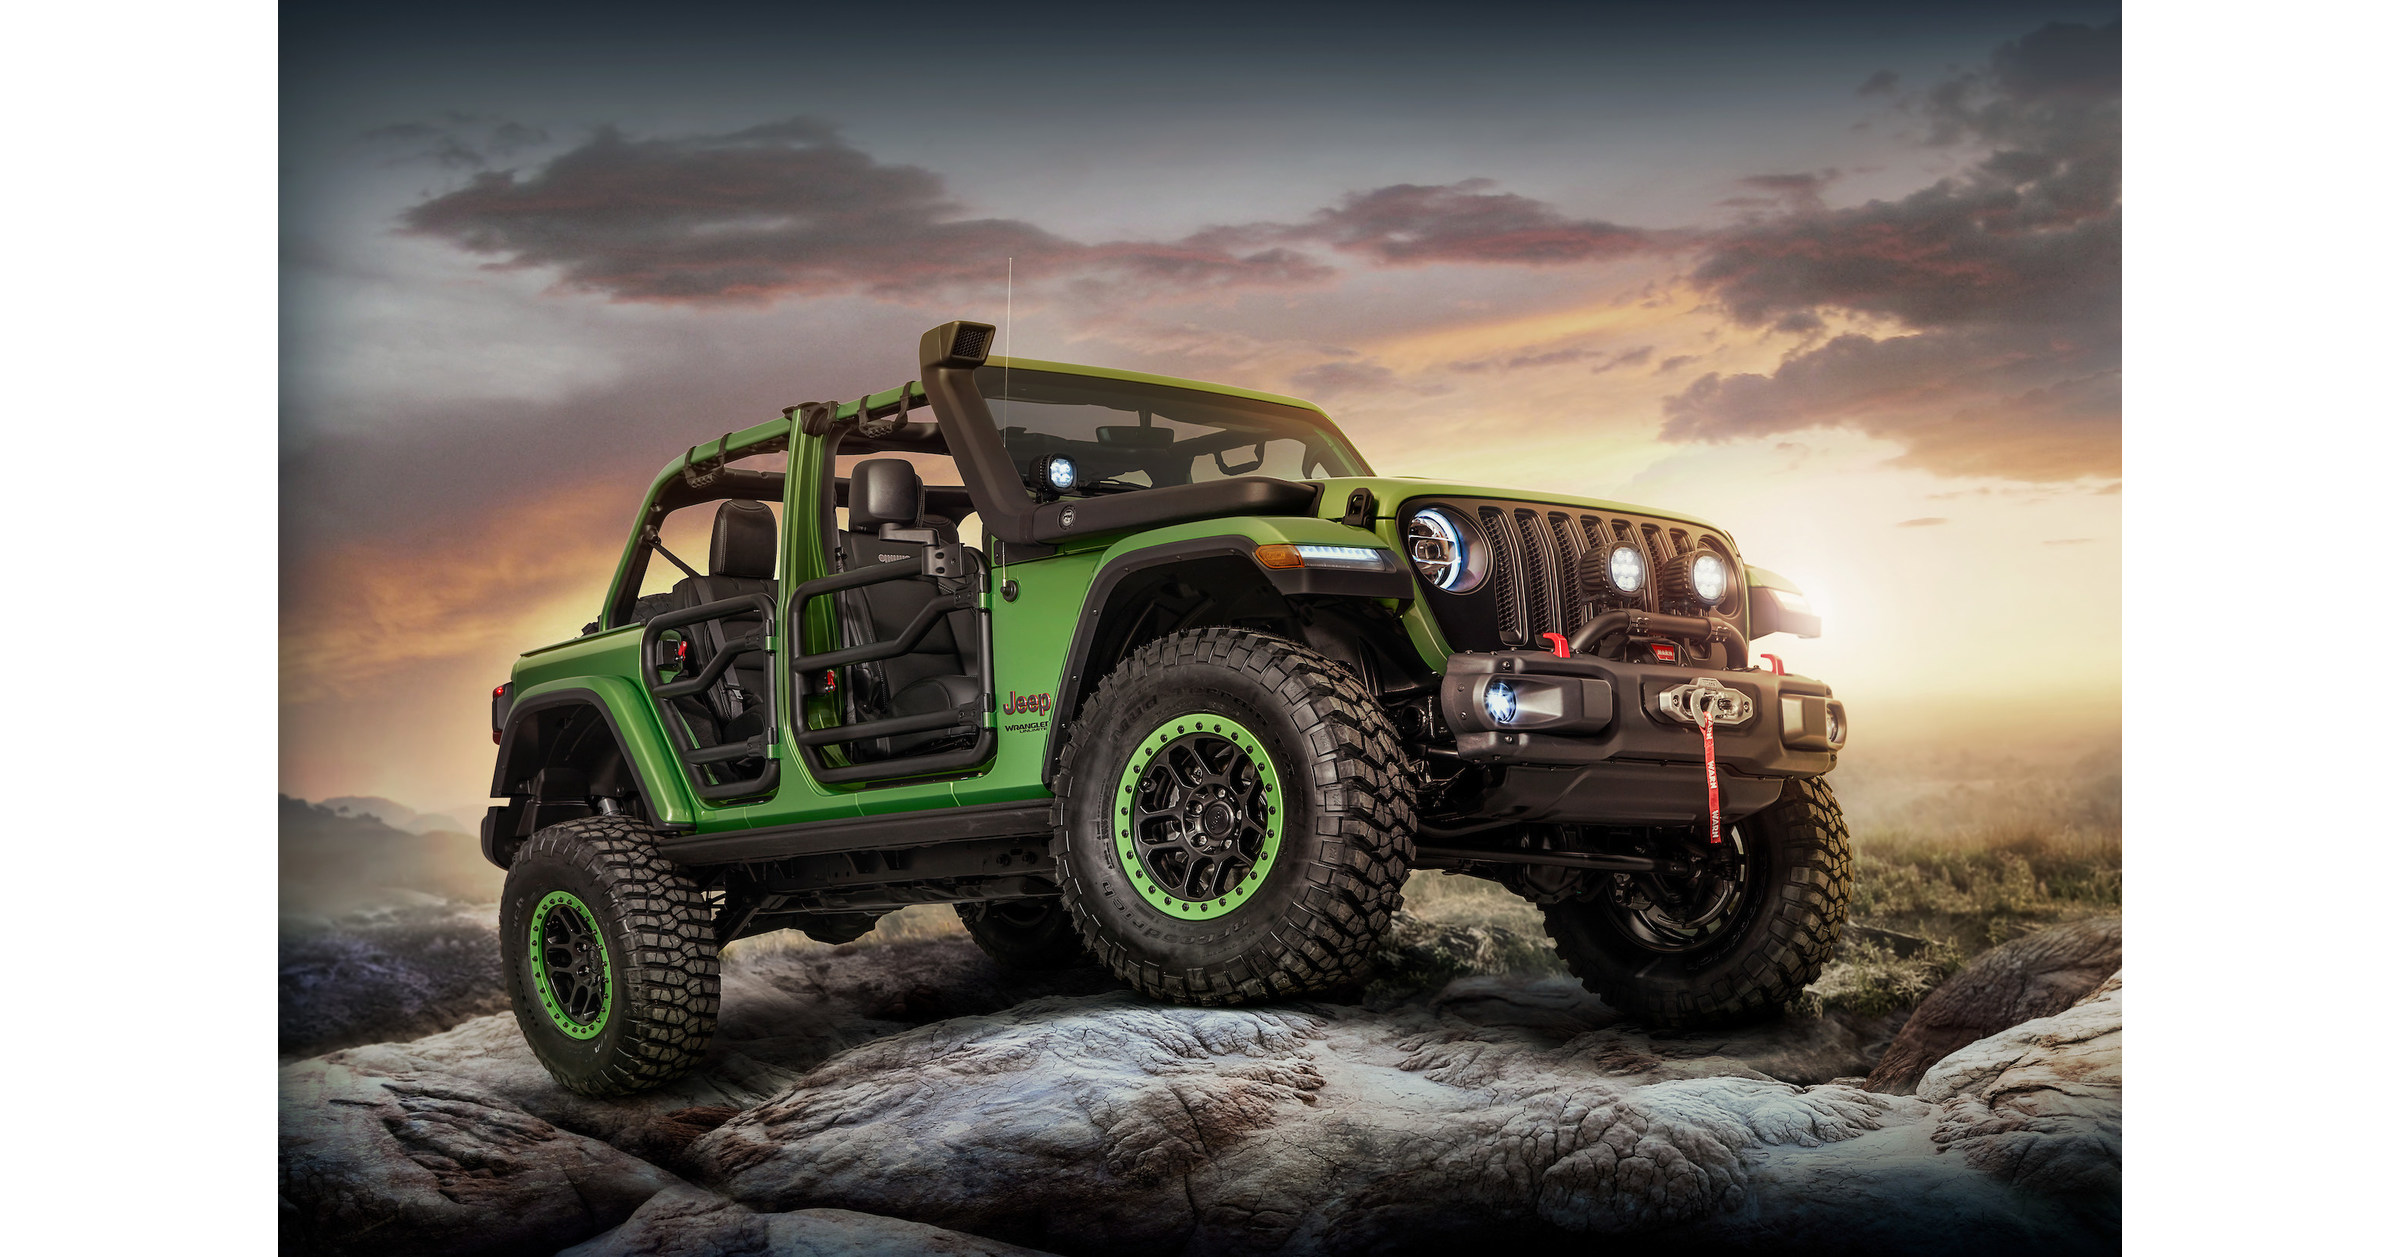 Mopar Premieres Pair of Customized All-new 2018 Jeep® Wrangler Vehicles at  LA Auto Show